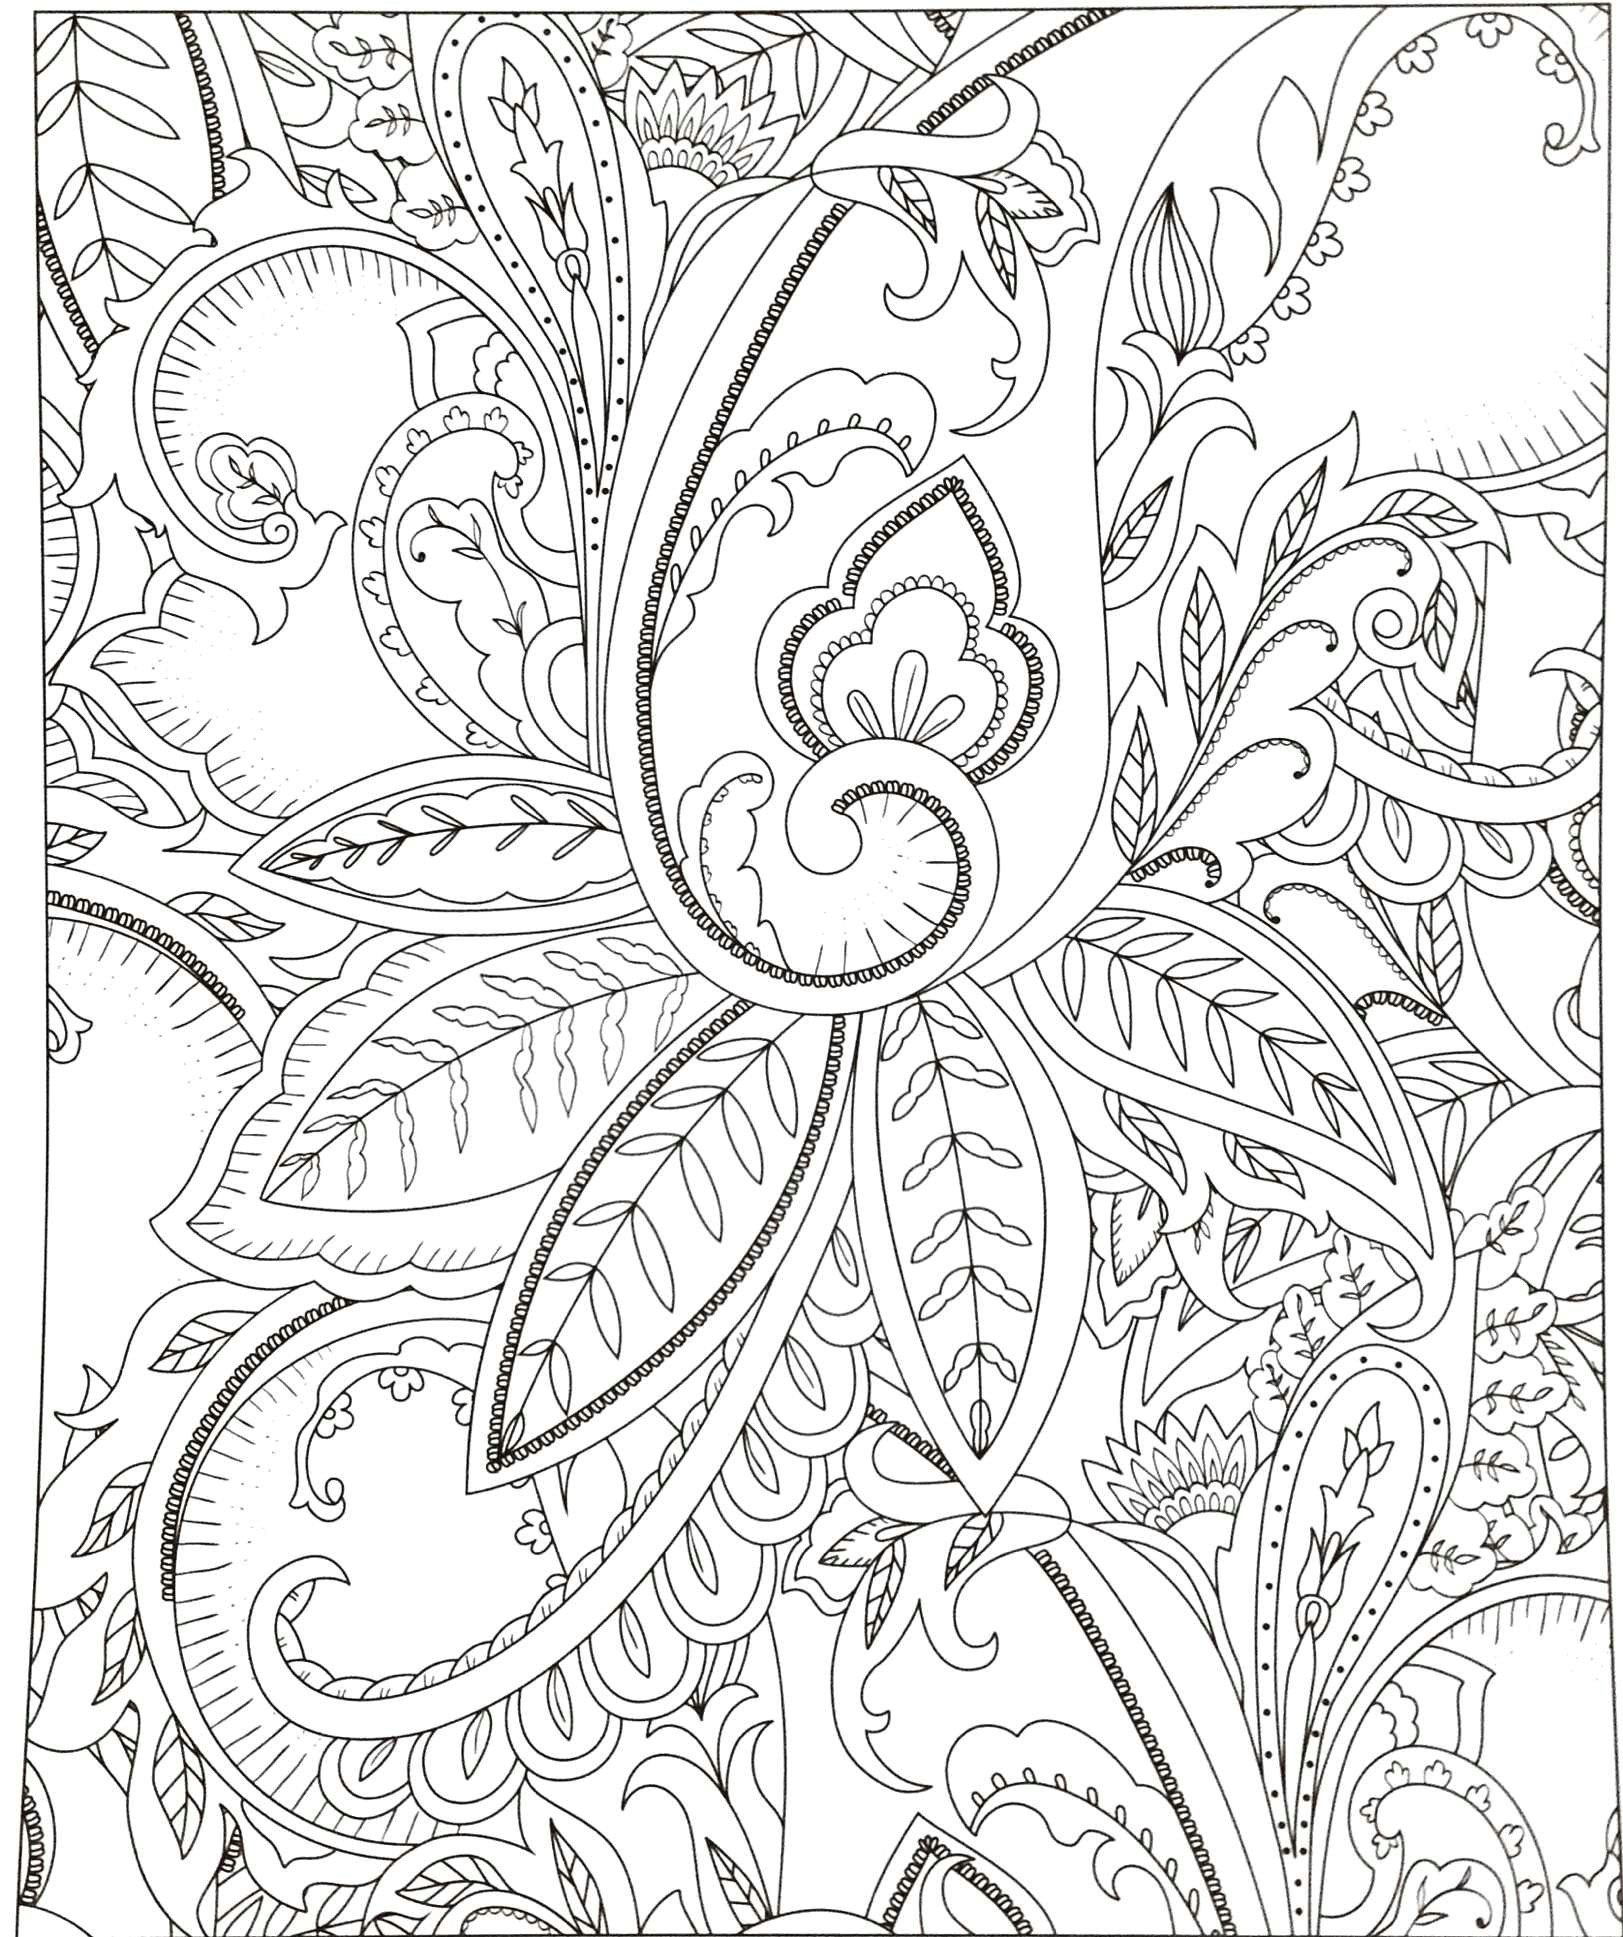 Drawing Colored Flowers Easy Easy to Draw Instruments Home Coloring Pages Best Color Sheet 0d